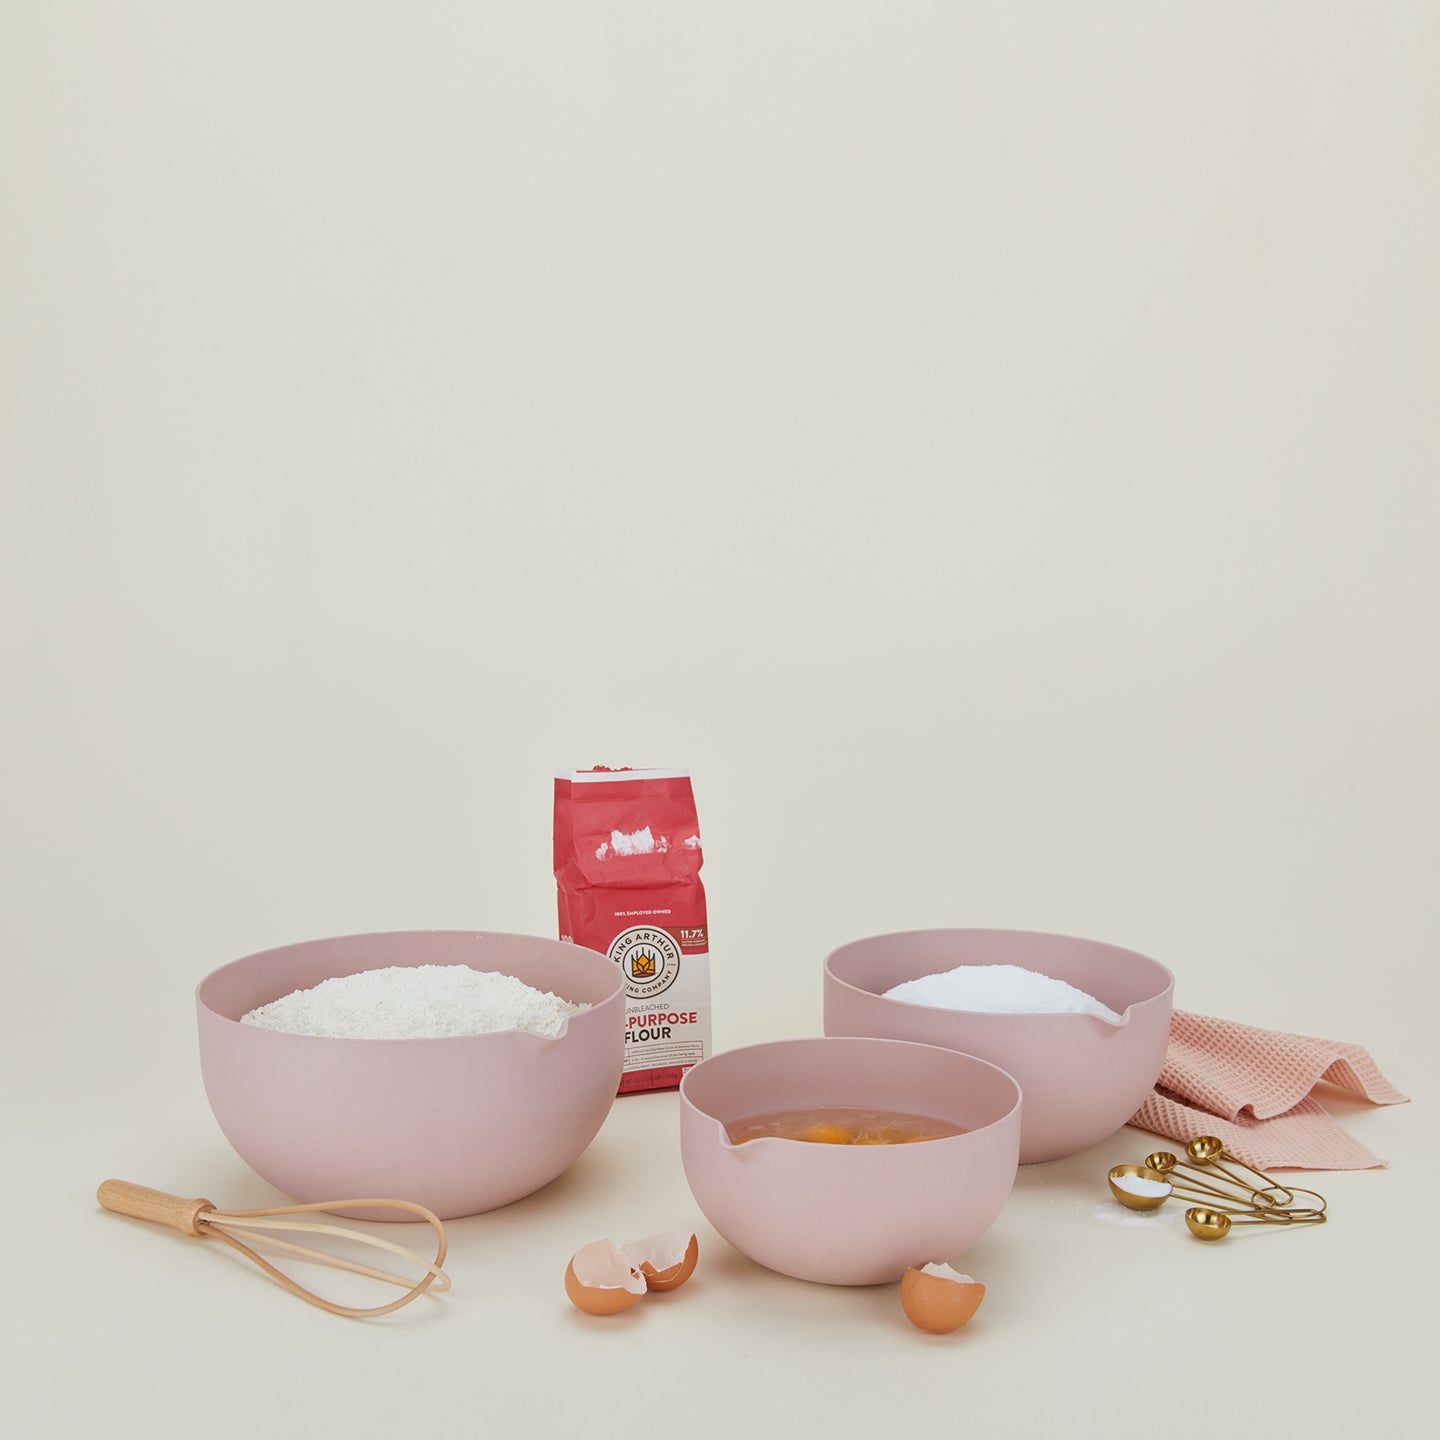 ANAMINA Large Mixing Bowl with 3 Extra Accessories - Never